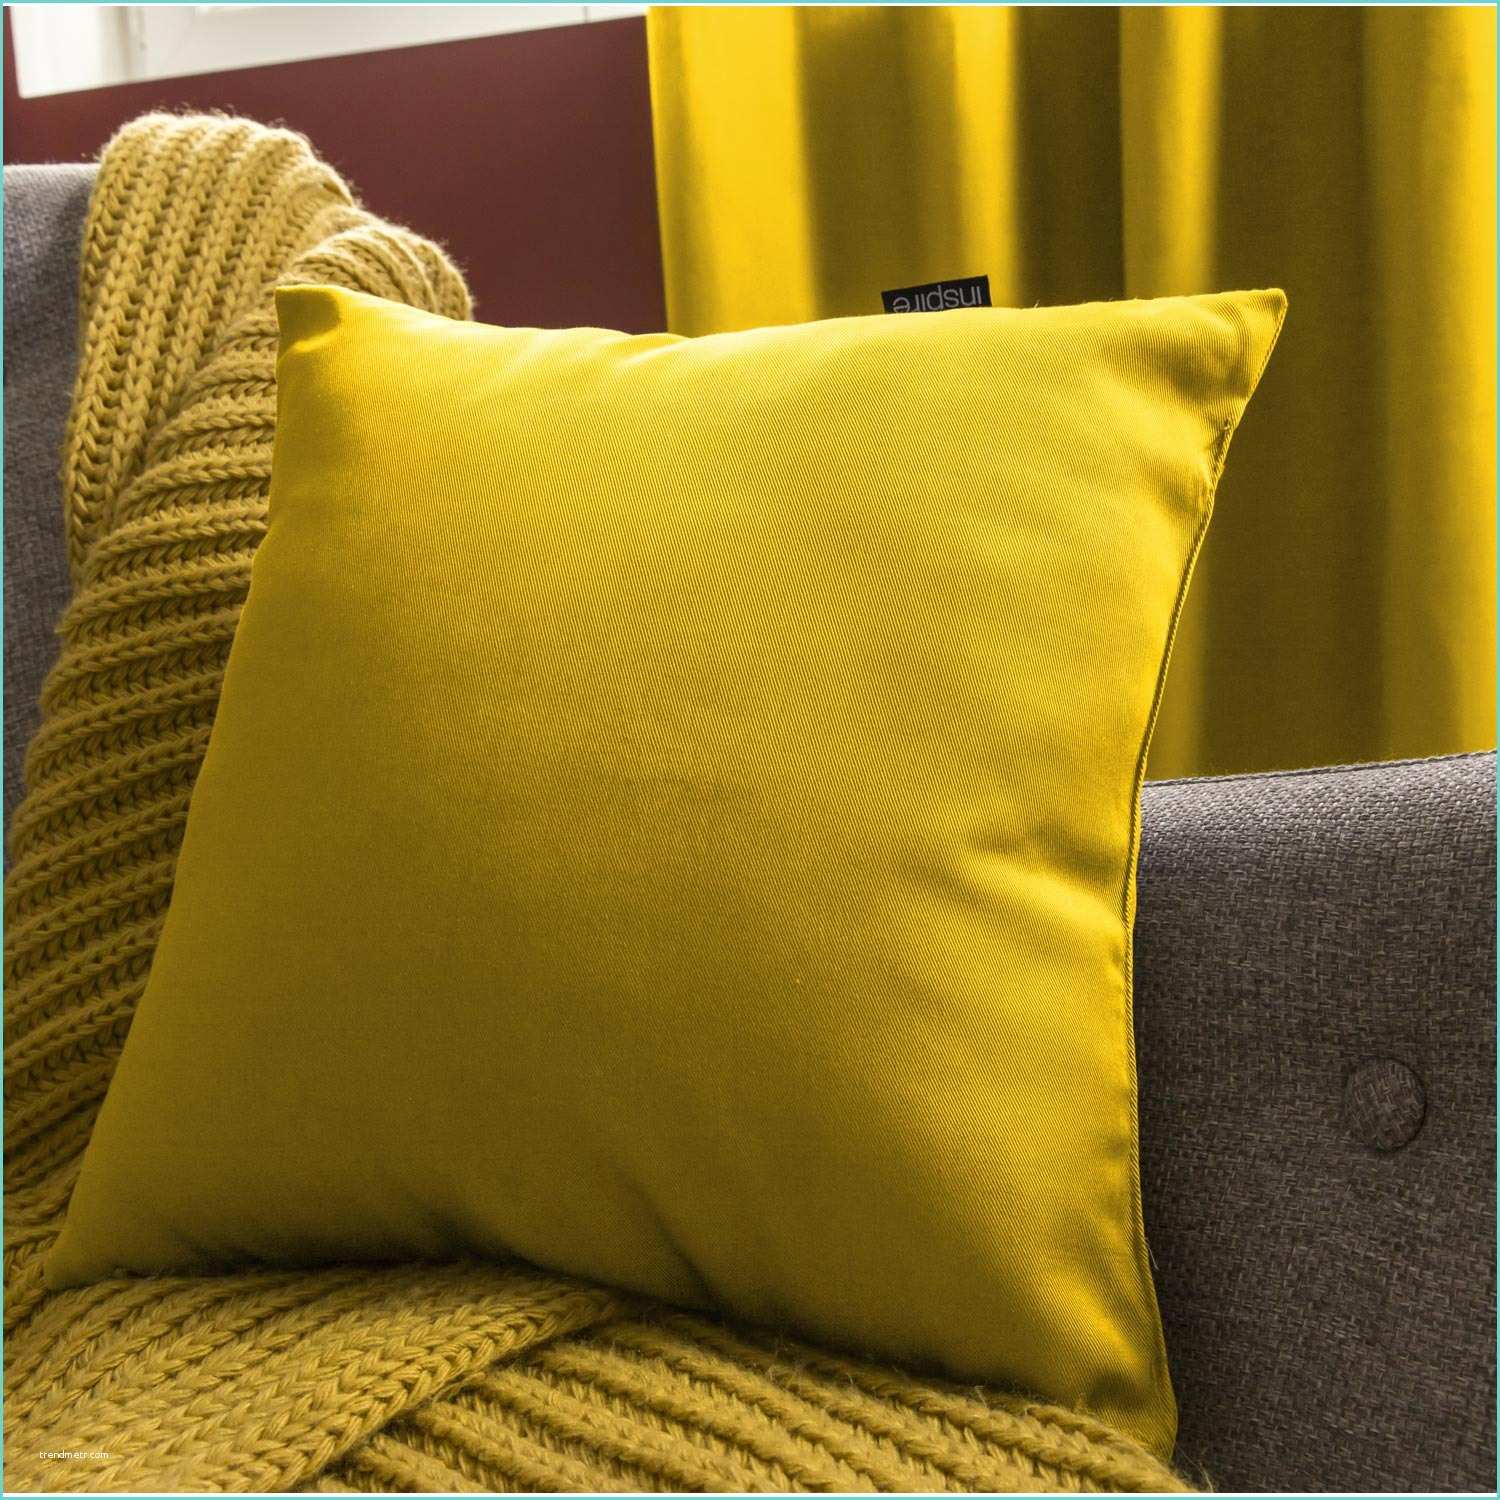 Rembourrage Coussin Leroy Merlin Coussin Roma Inspire Jaune Anis N°4 L 35 X H 35 Cm